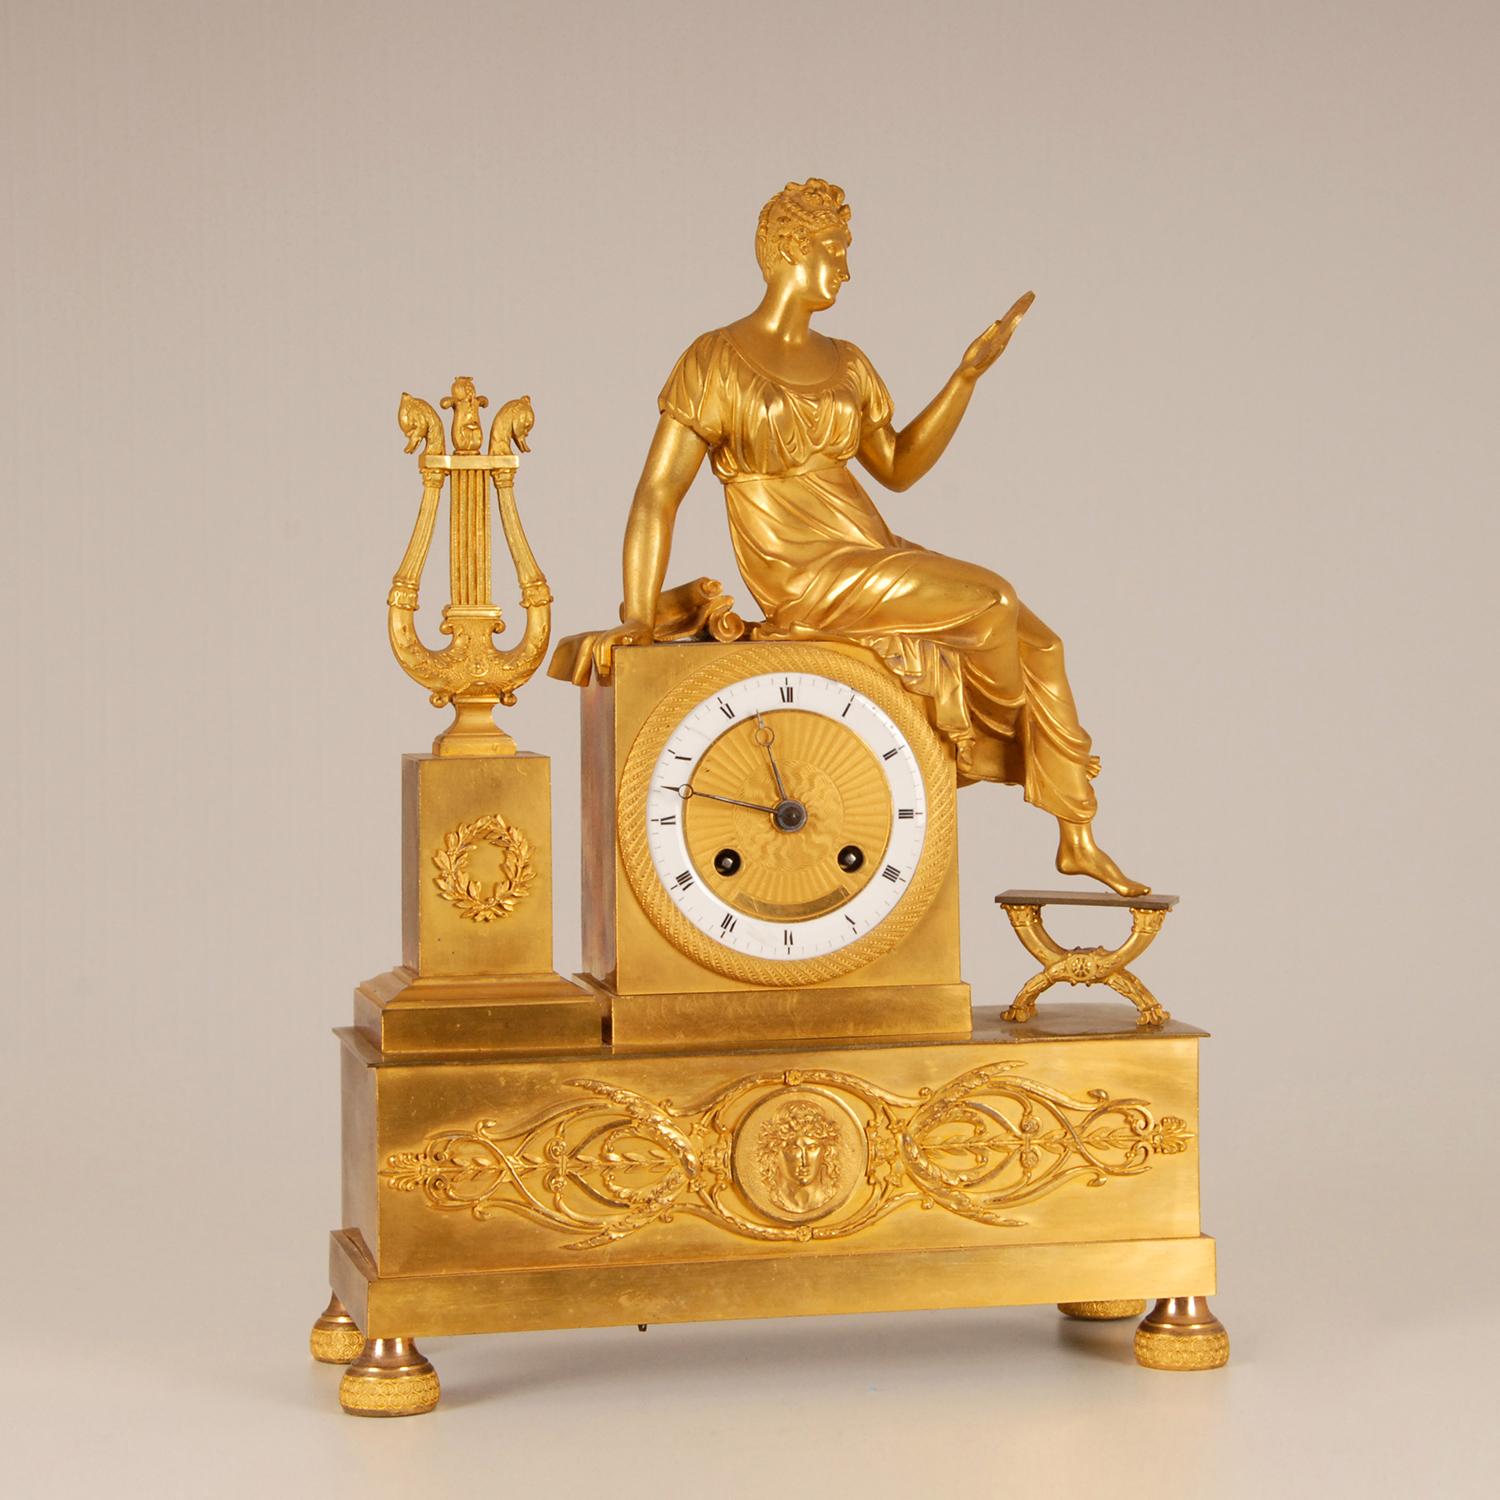 Antique French 1st Empire pendulum clock fire gilded bronze.
Attributed to Pierre-Philippe Thomire.
Depicting Laura de Noves

Laura was the wife of Count Hugues de Sade.
She married in the year 1325 at the age of 15.
Laura had a great